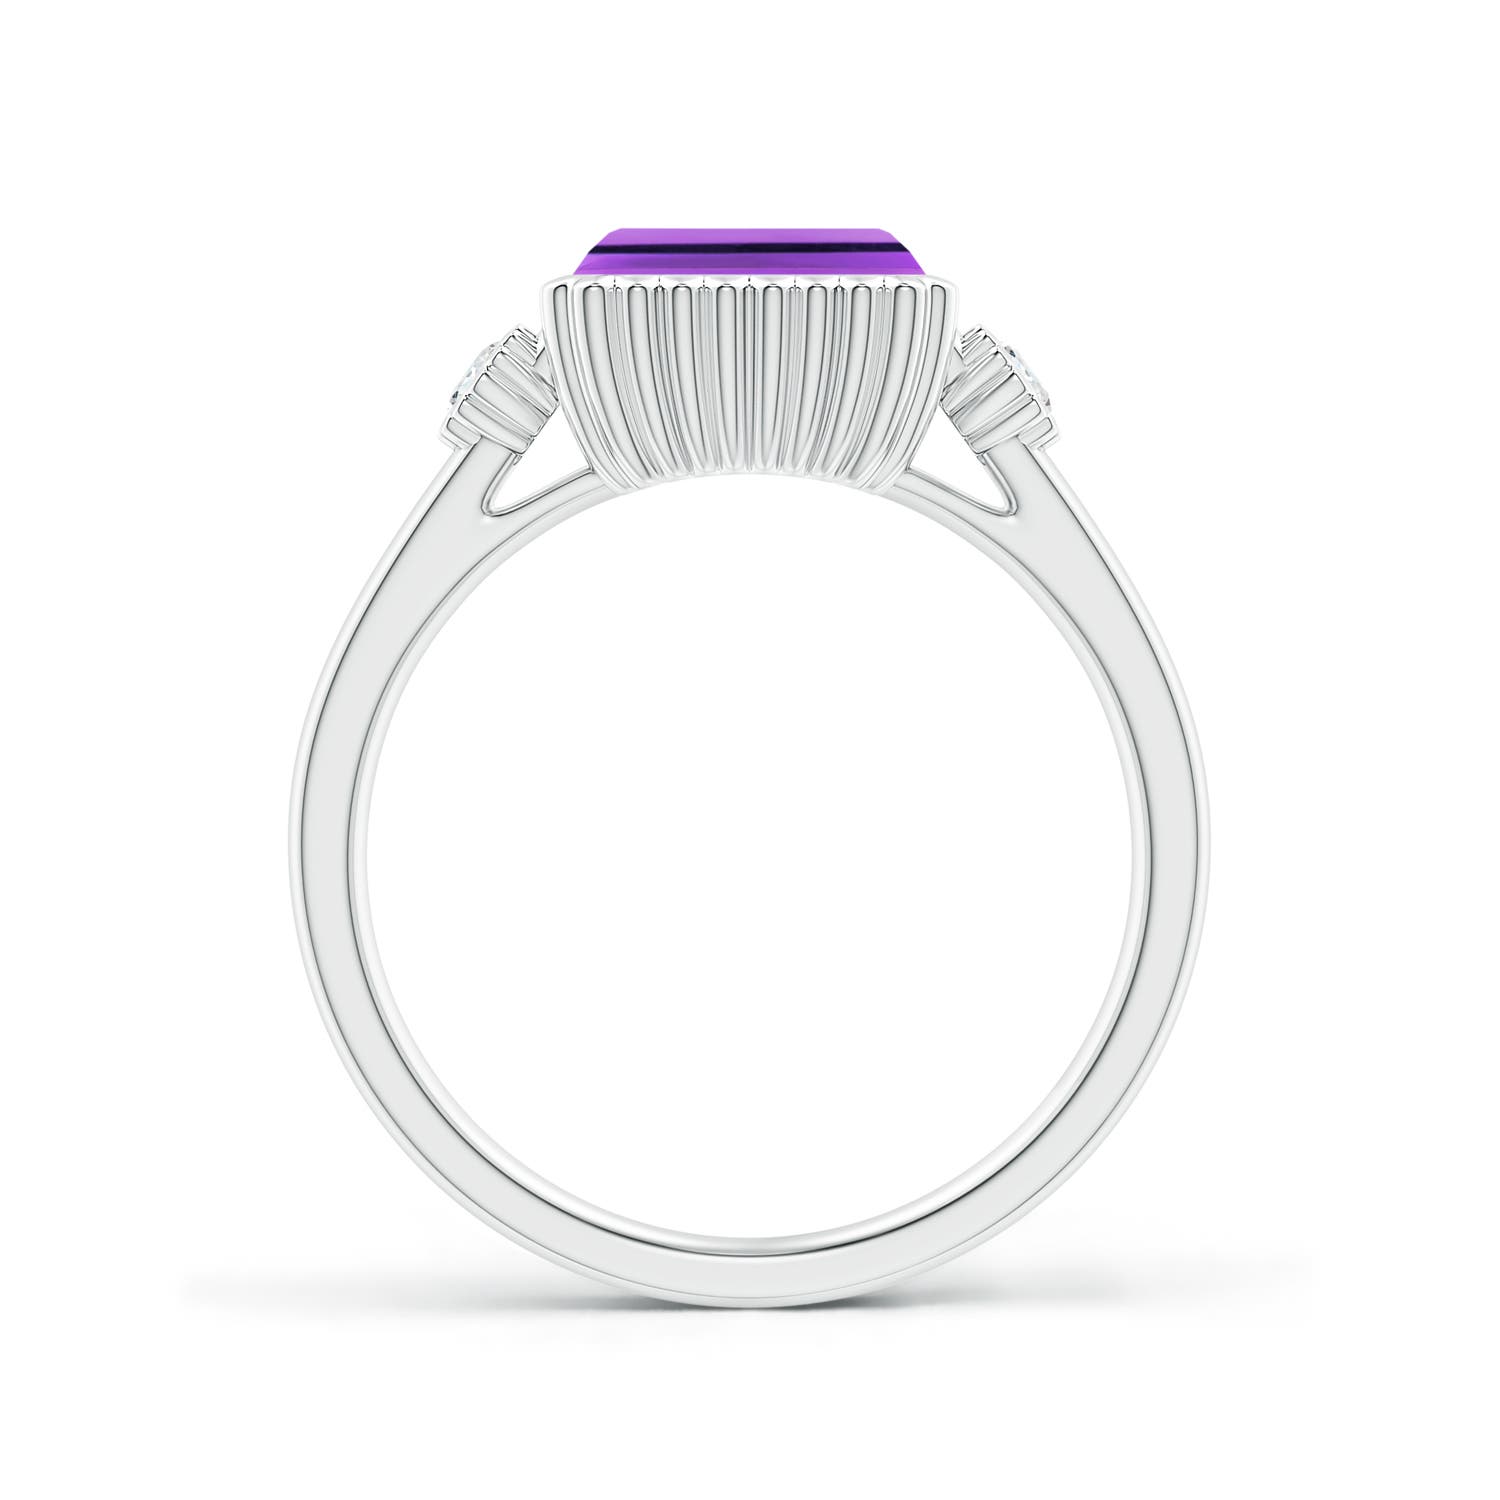 AA - Amethyst / 1.59 CT / 14 KT White Gold